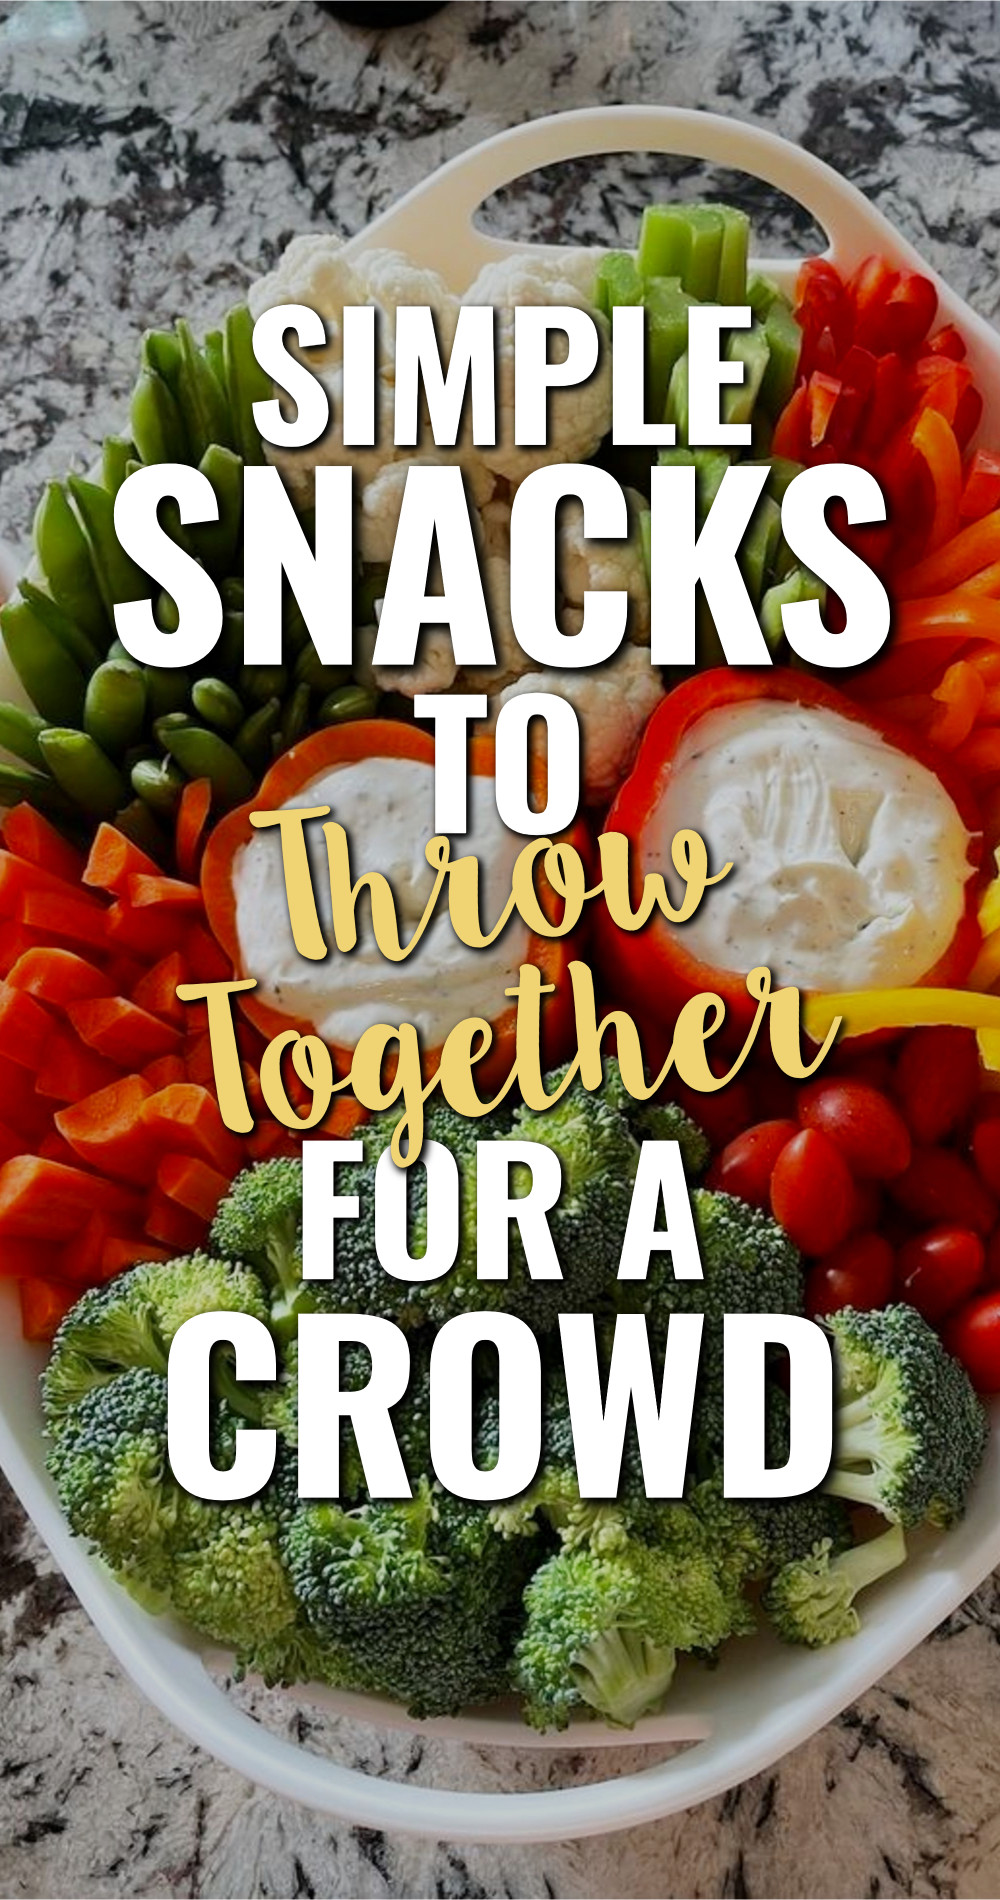 Simple snacks to throw together for a crowd